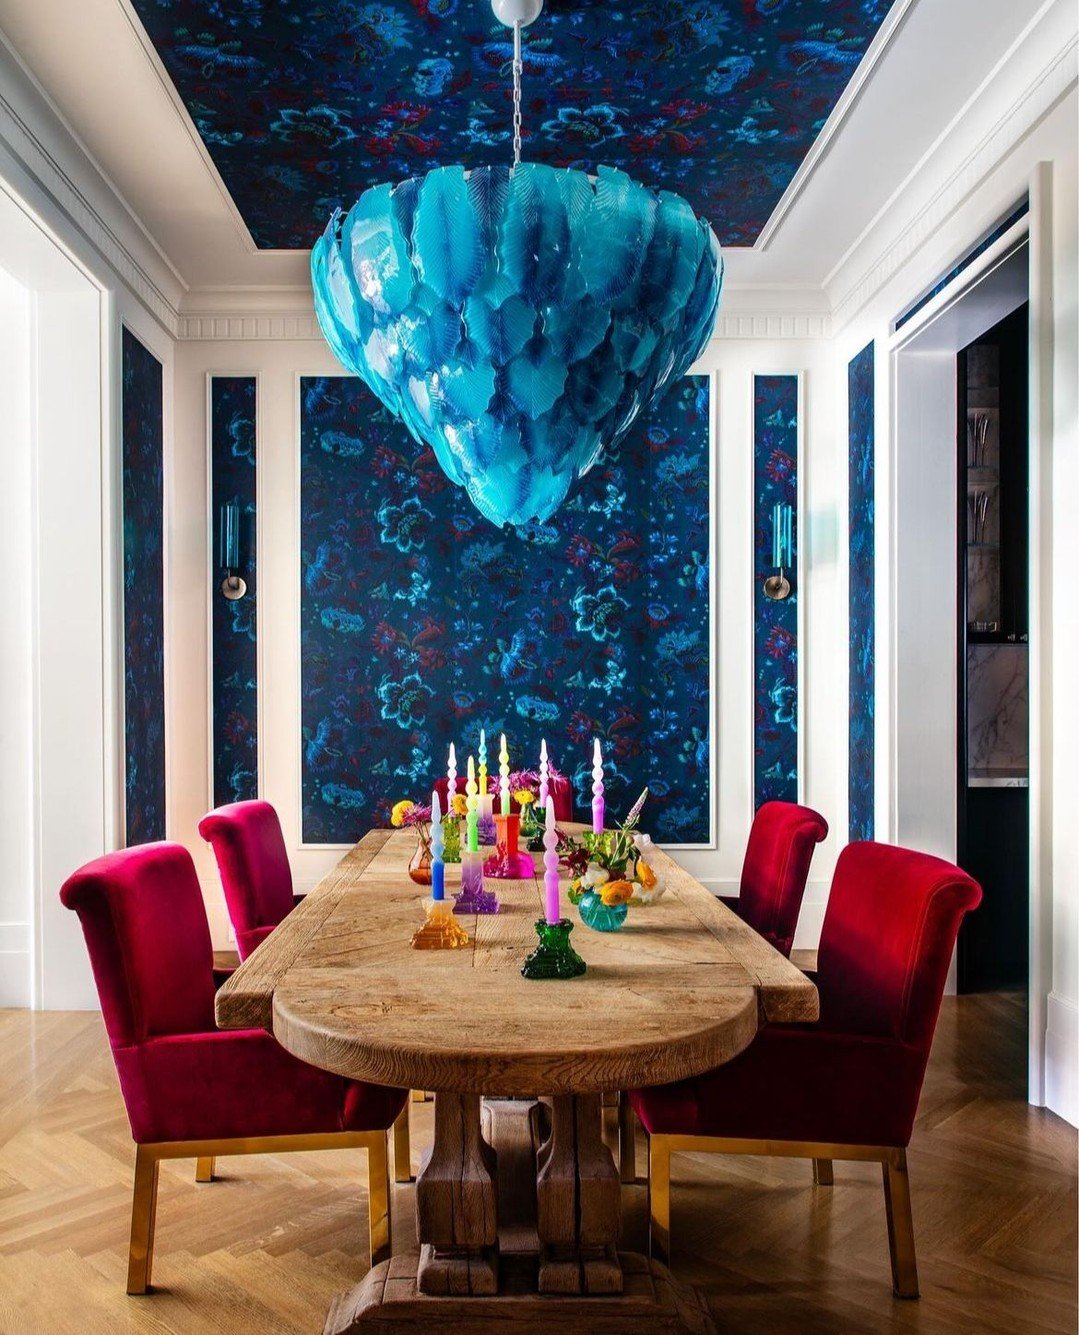 This blue chandelier really sets the tone of this dining room. (Design by @sashabikoff, photo by @nickjohnsoninteriors) #thecravecollective #interiordesign #design #interiors123 #home